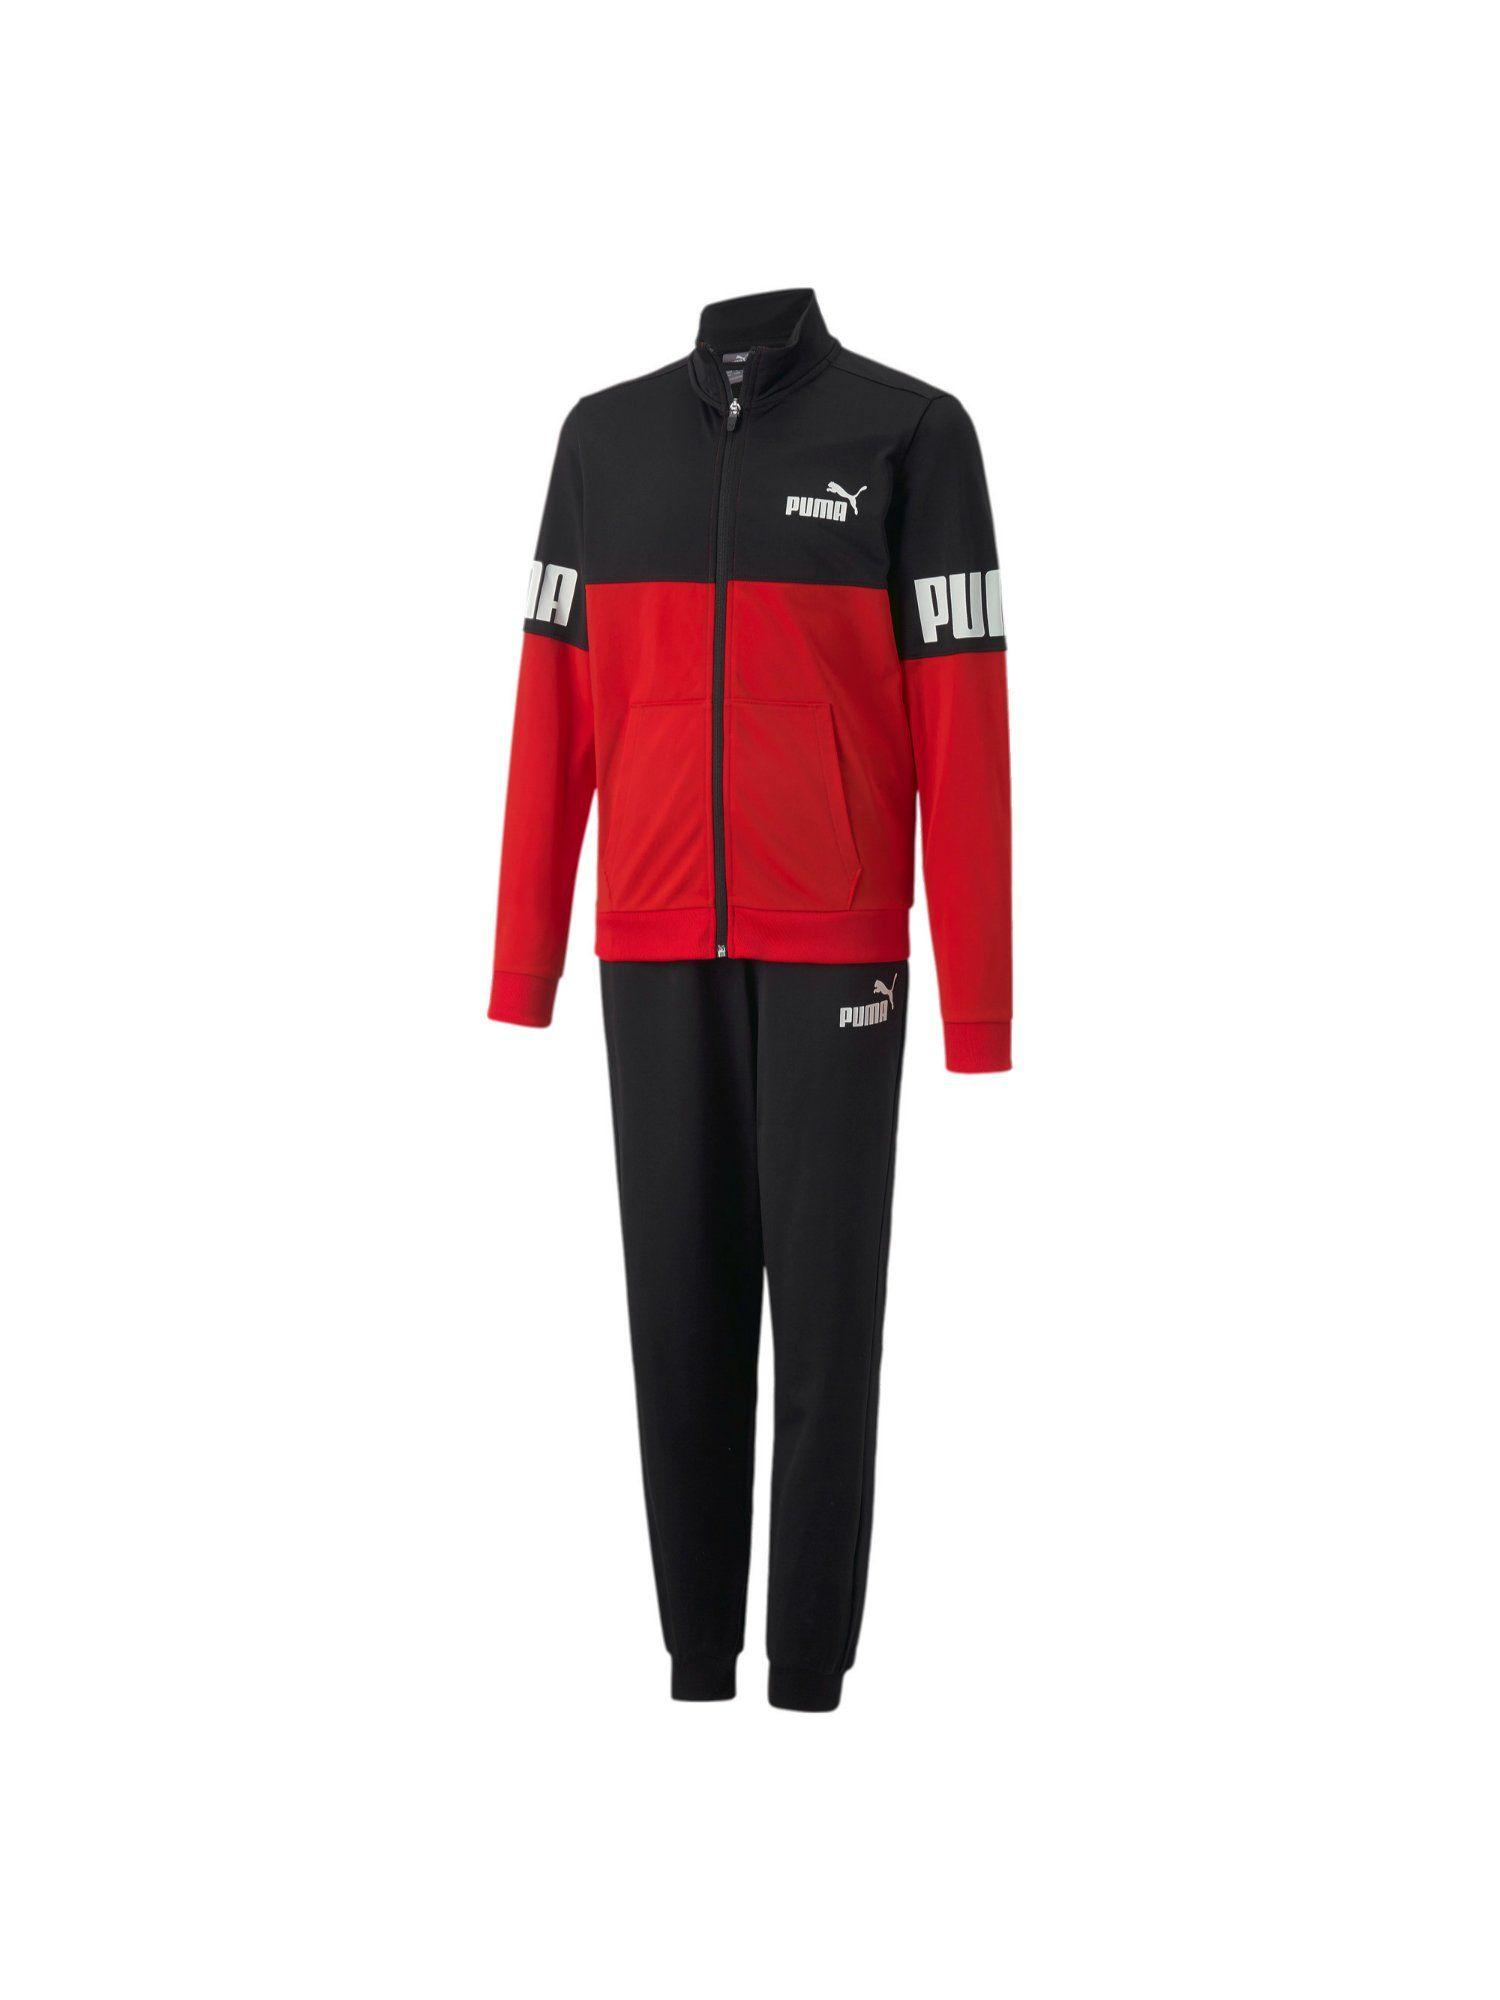 power-boys-red-track-suit